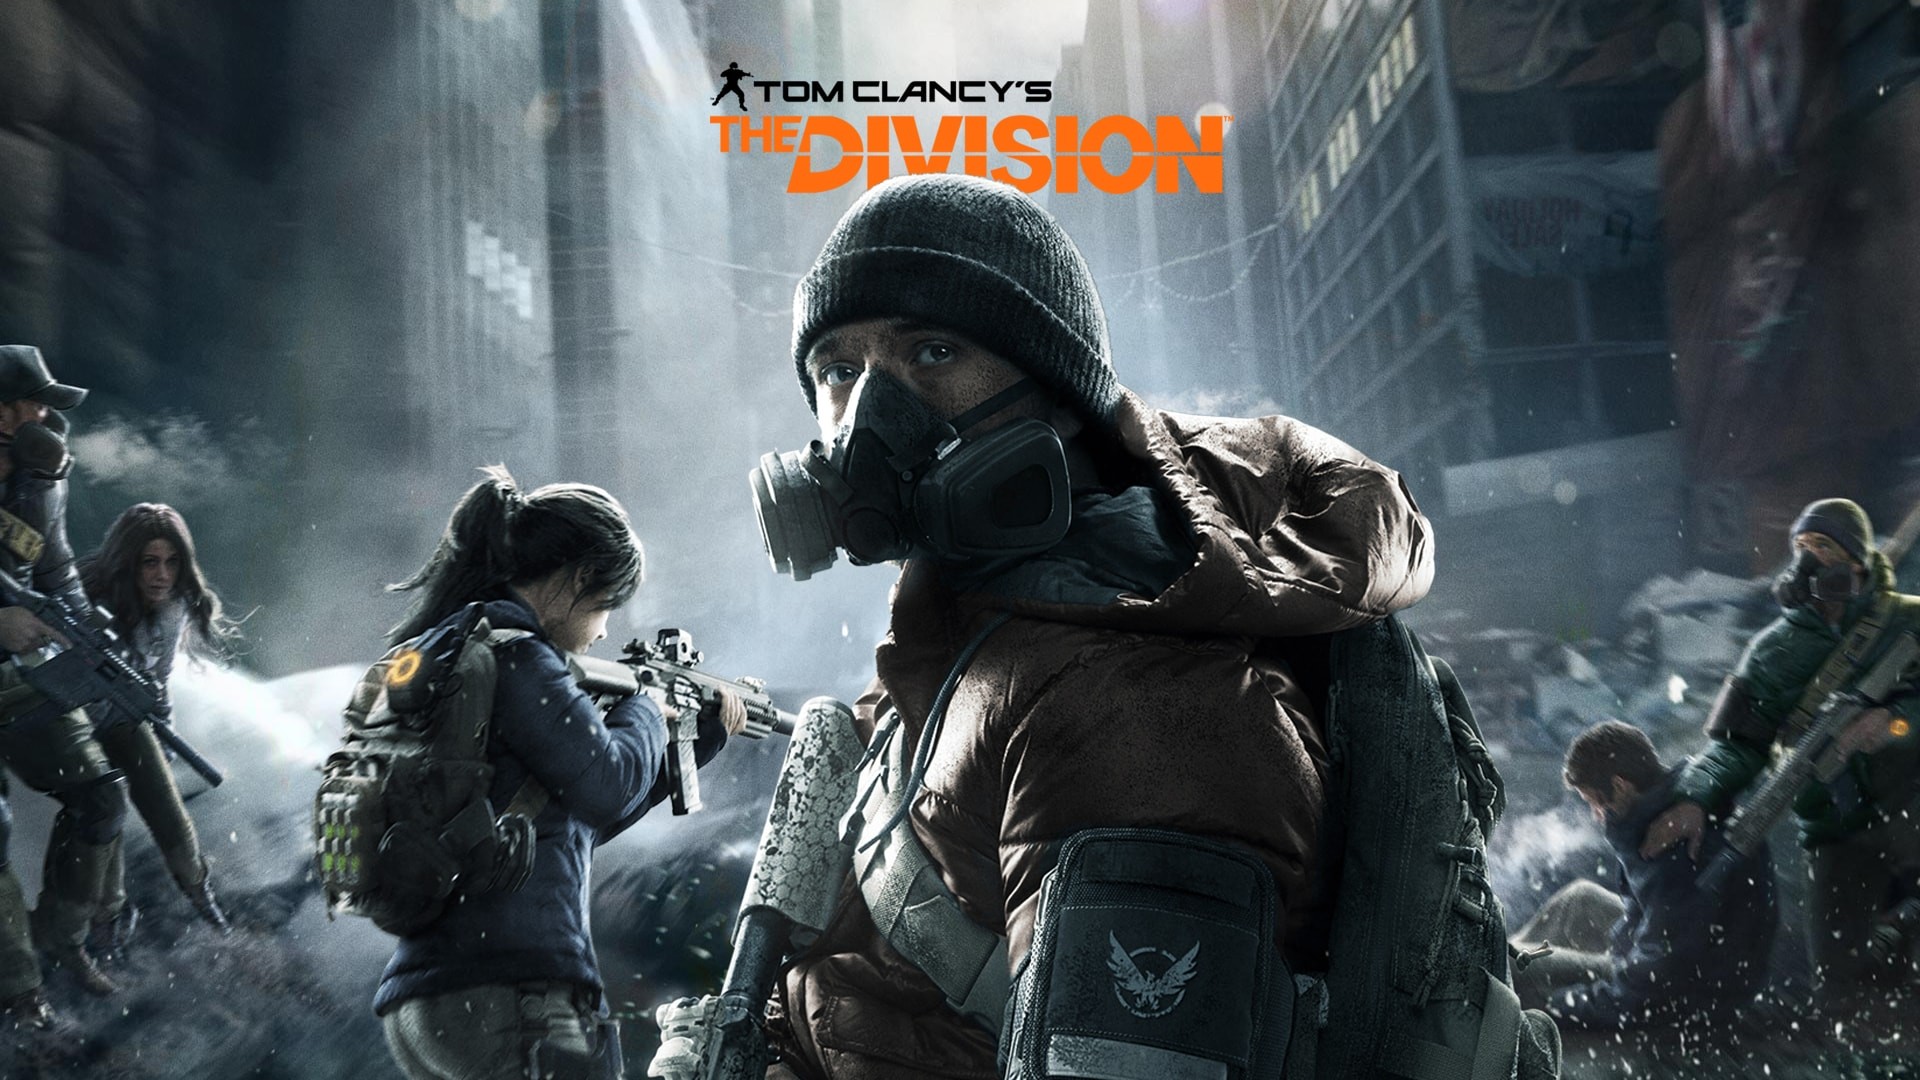 1920x1080 ... Tom Clancy's The Division Wallpapers hd